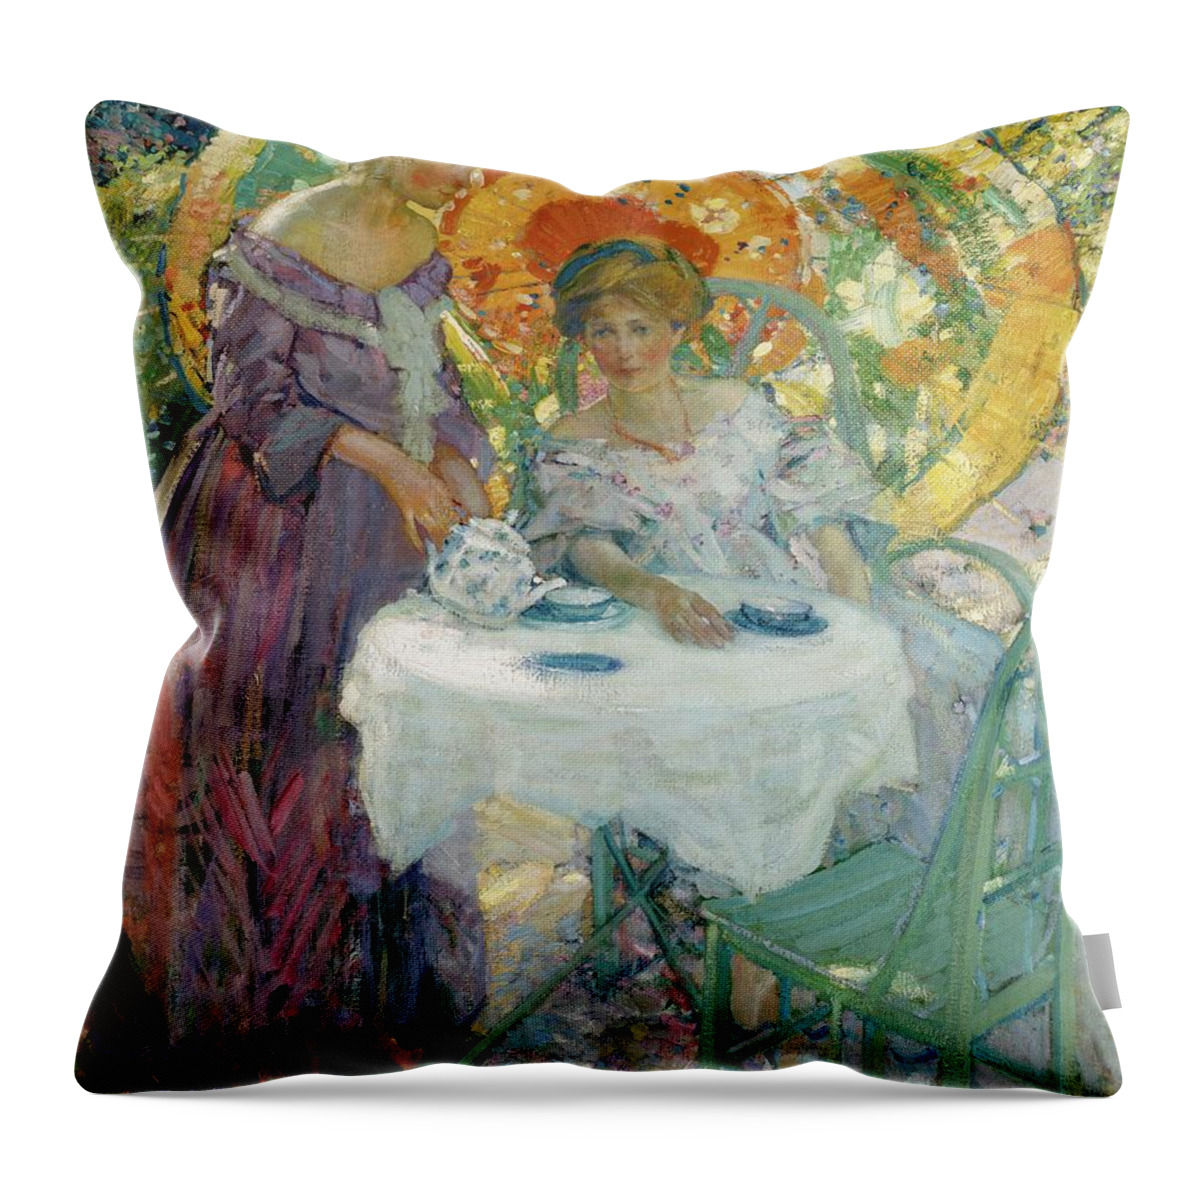 Tea Throw Pillow featuring the painting Afternoon Tea by Richard Emile Miller